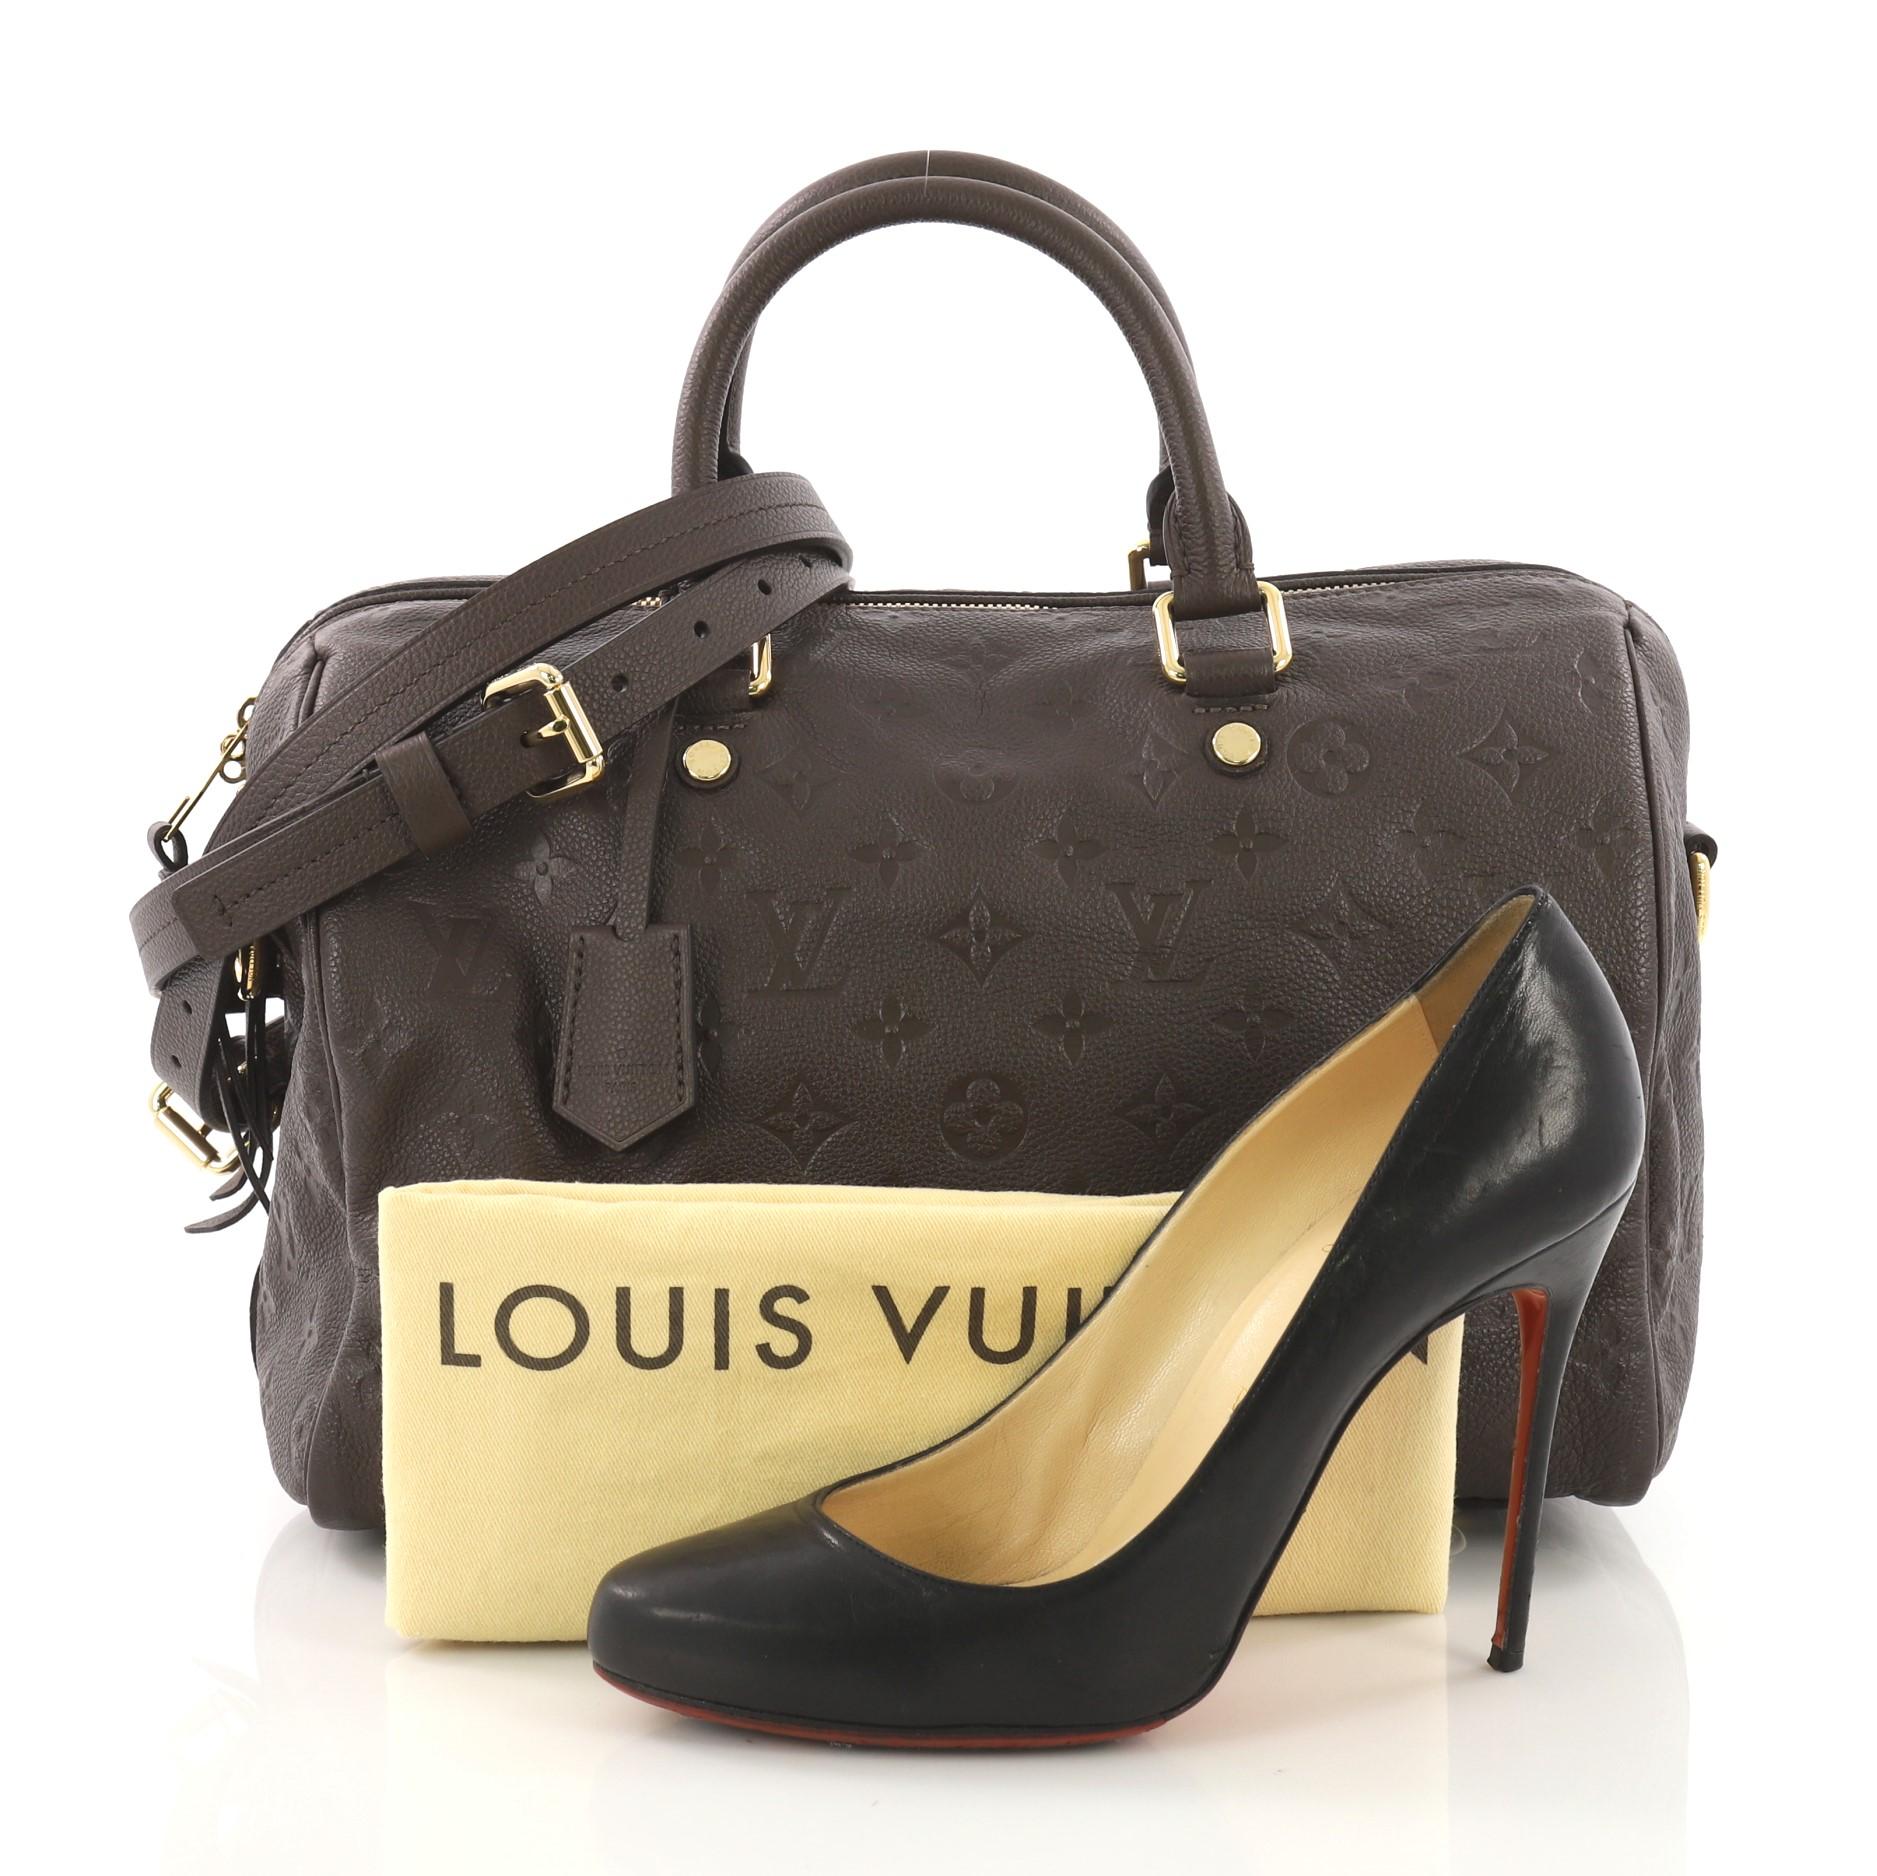 This Louis Vuitton Speedy Bandouliere Bag Monogram Empreinte Leather 30, crafted in brown monogram empreinte leather, features dual rolled leather handles, protective base studs, and gold-tone hardware. Its zip closure opens to a brown fabric